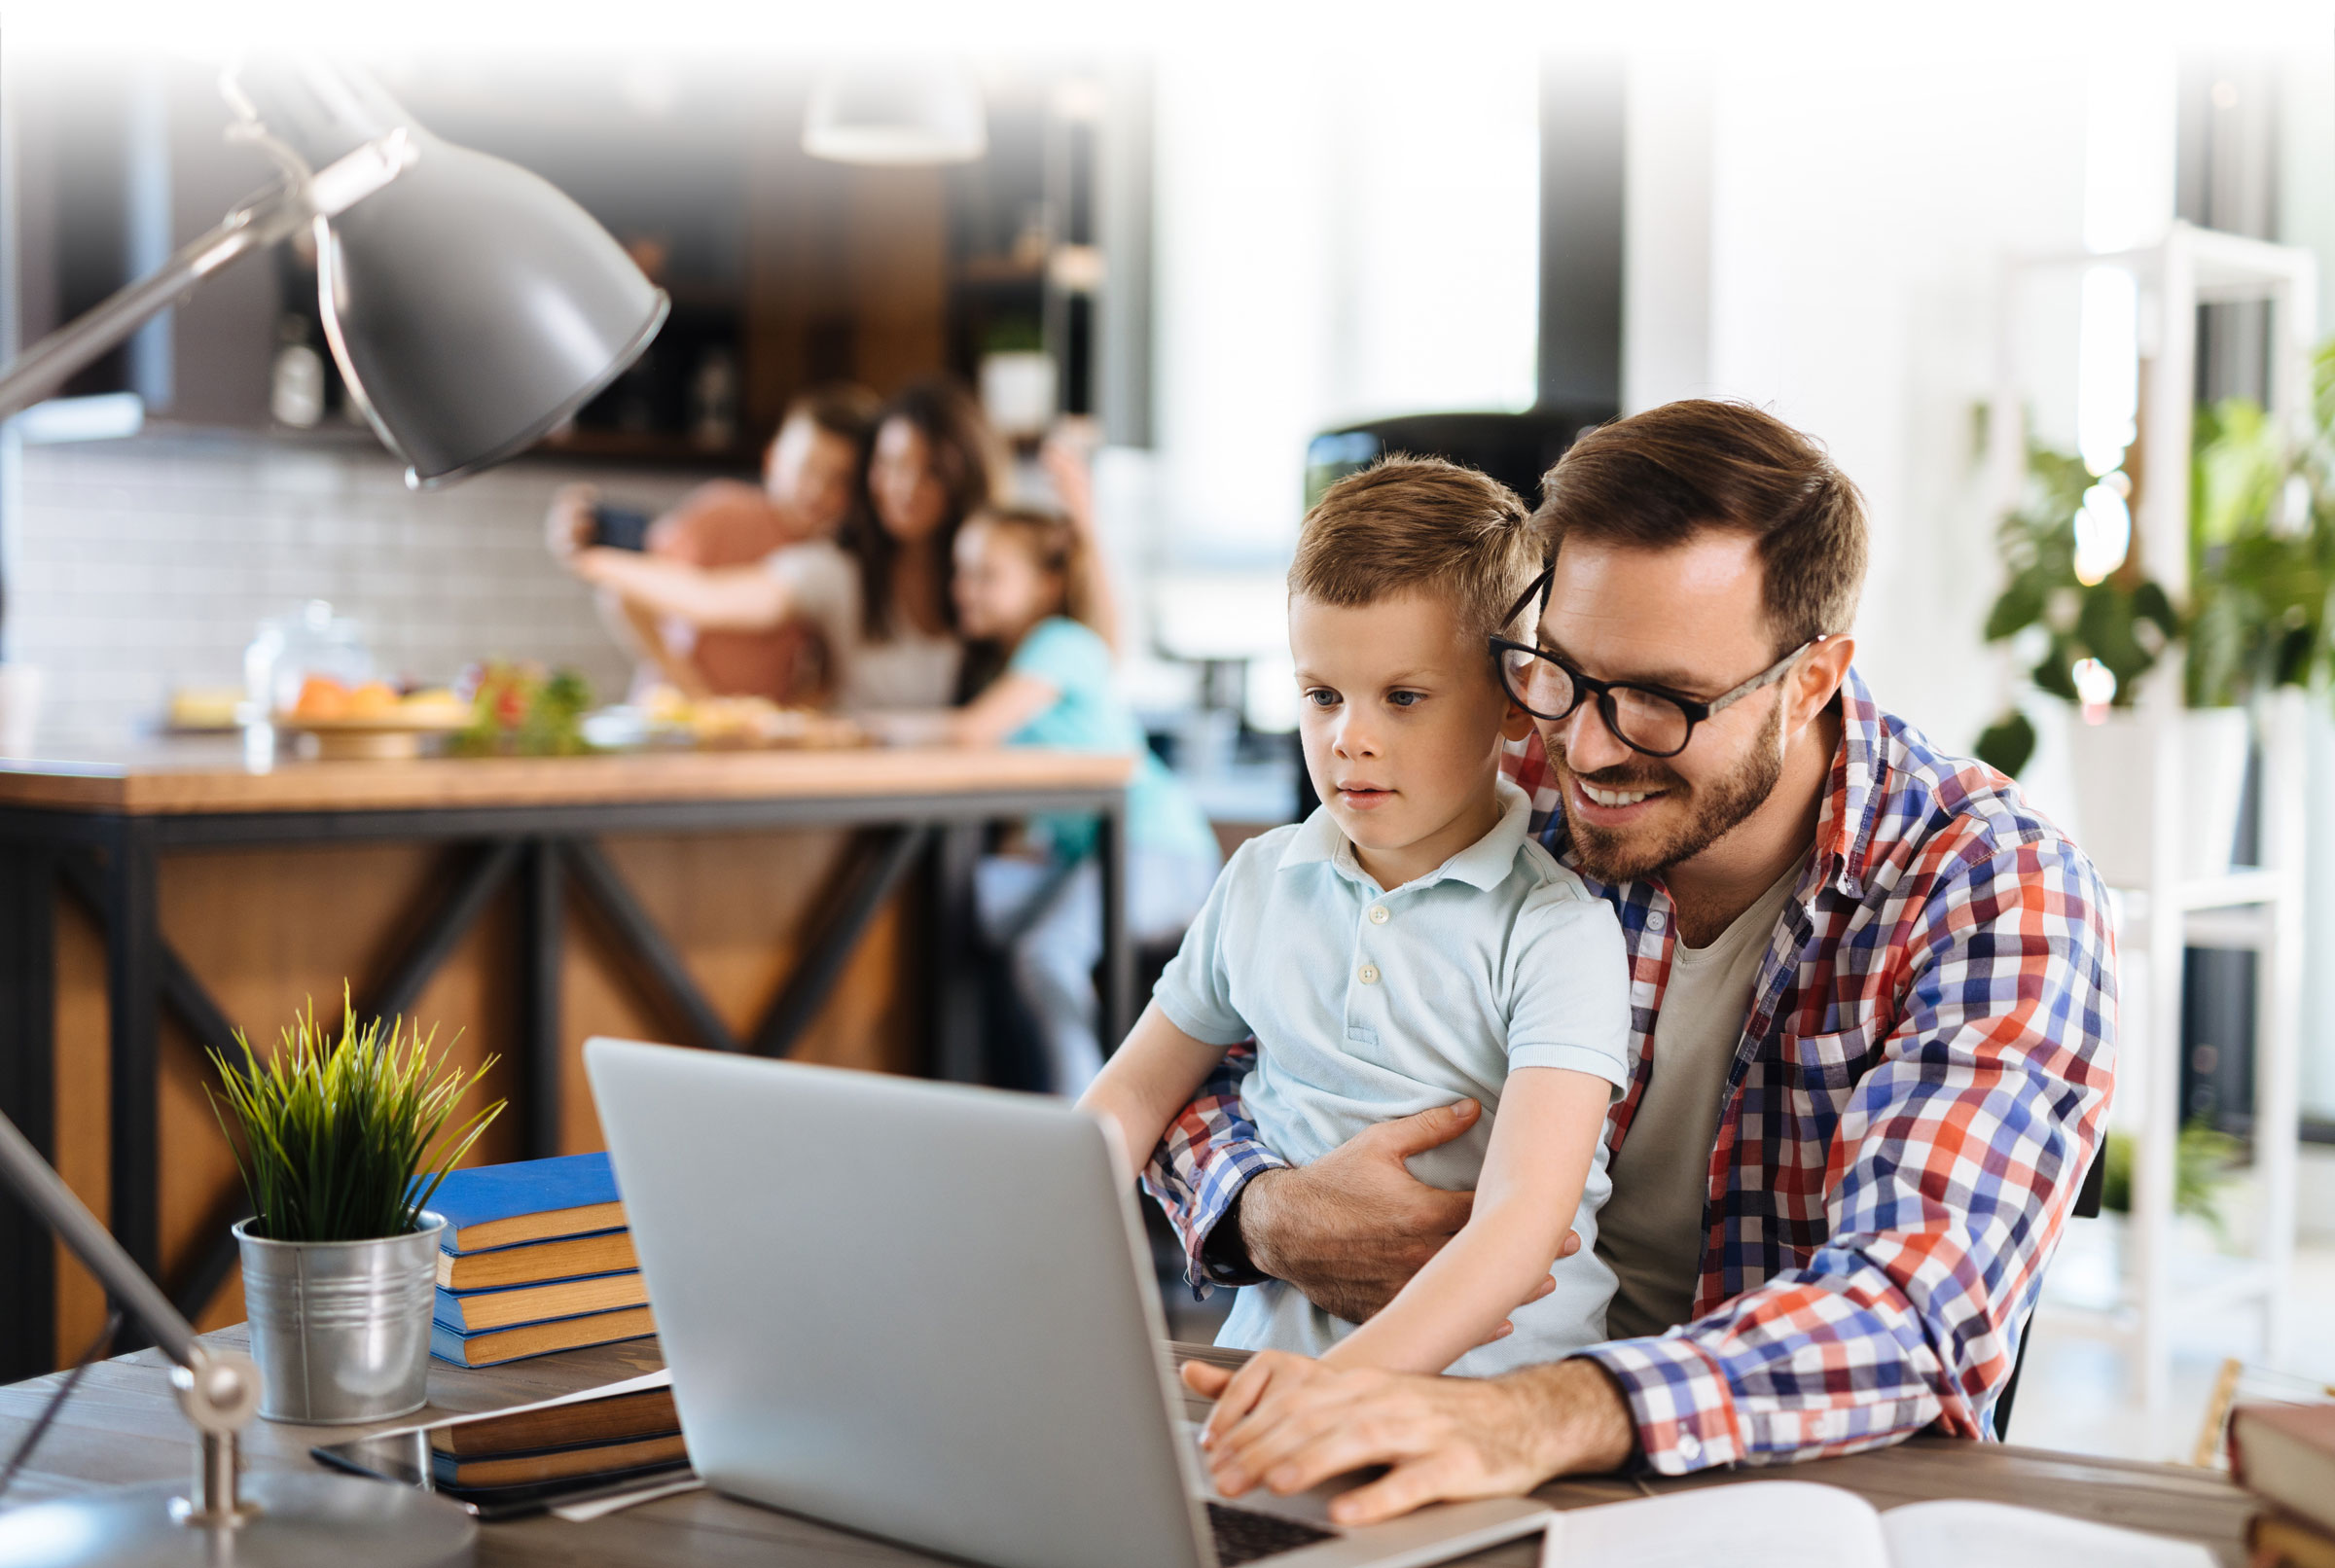 Dad with son on computer with family behind them